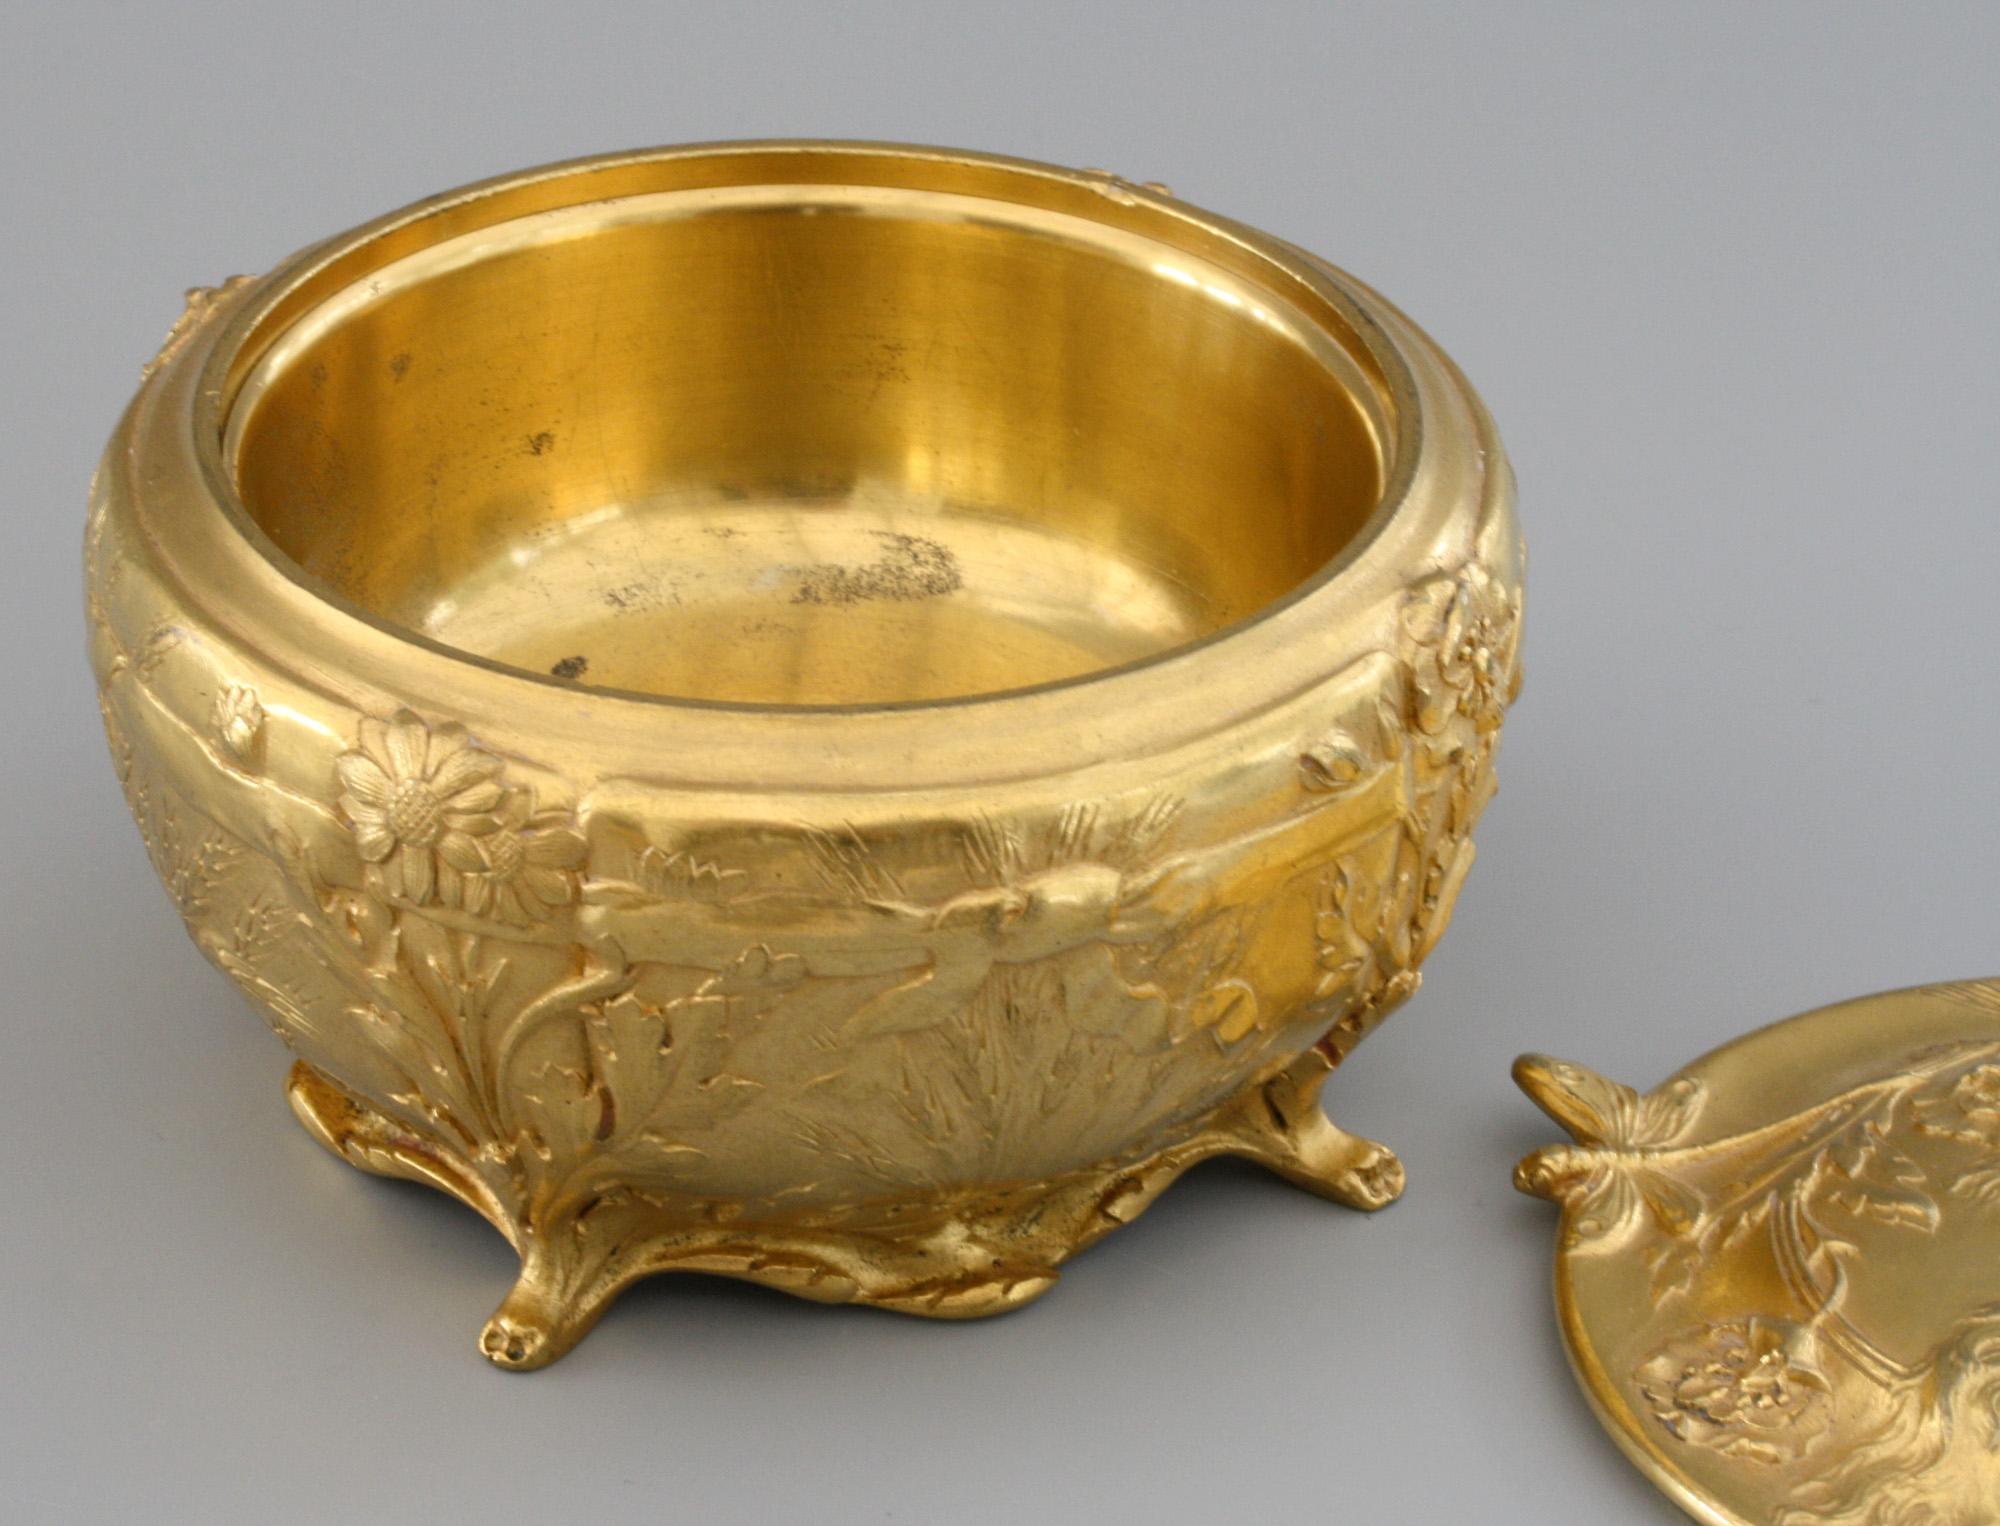 A stunning quality Art Nouveau French richly gilded bronze lidded box designed by C Robinet for Ferdinand Barbedienne (1810-1892) and dating from the latter 19th century. The rounded box stands raised on four paw shaped feet and scroll base edge